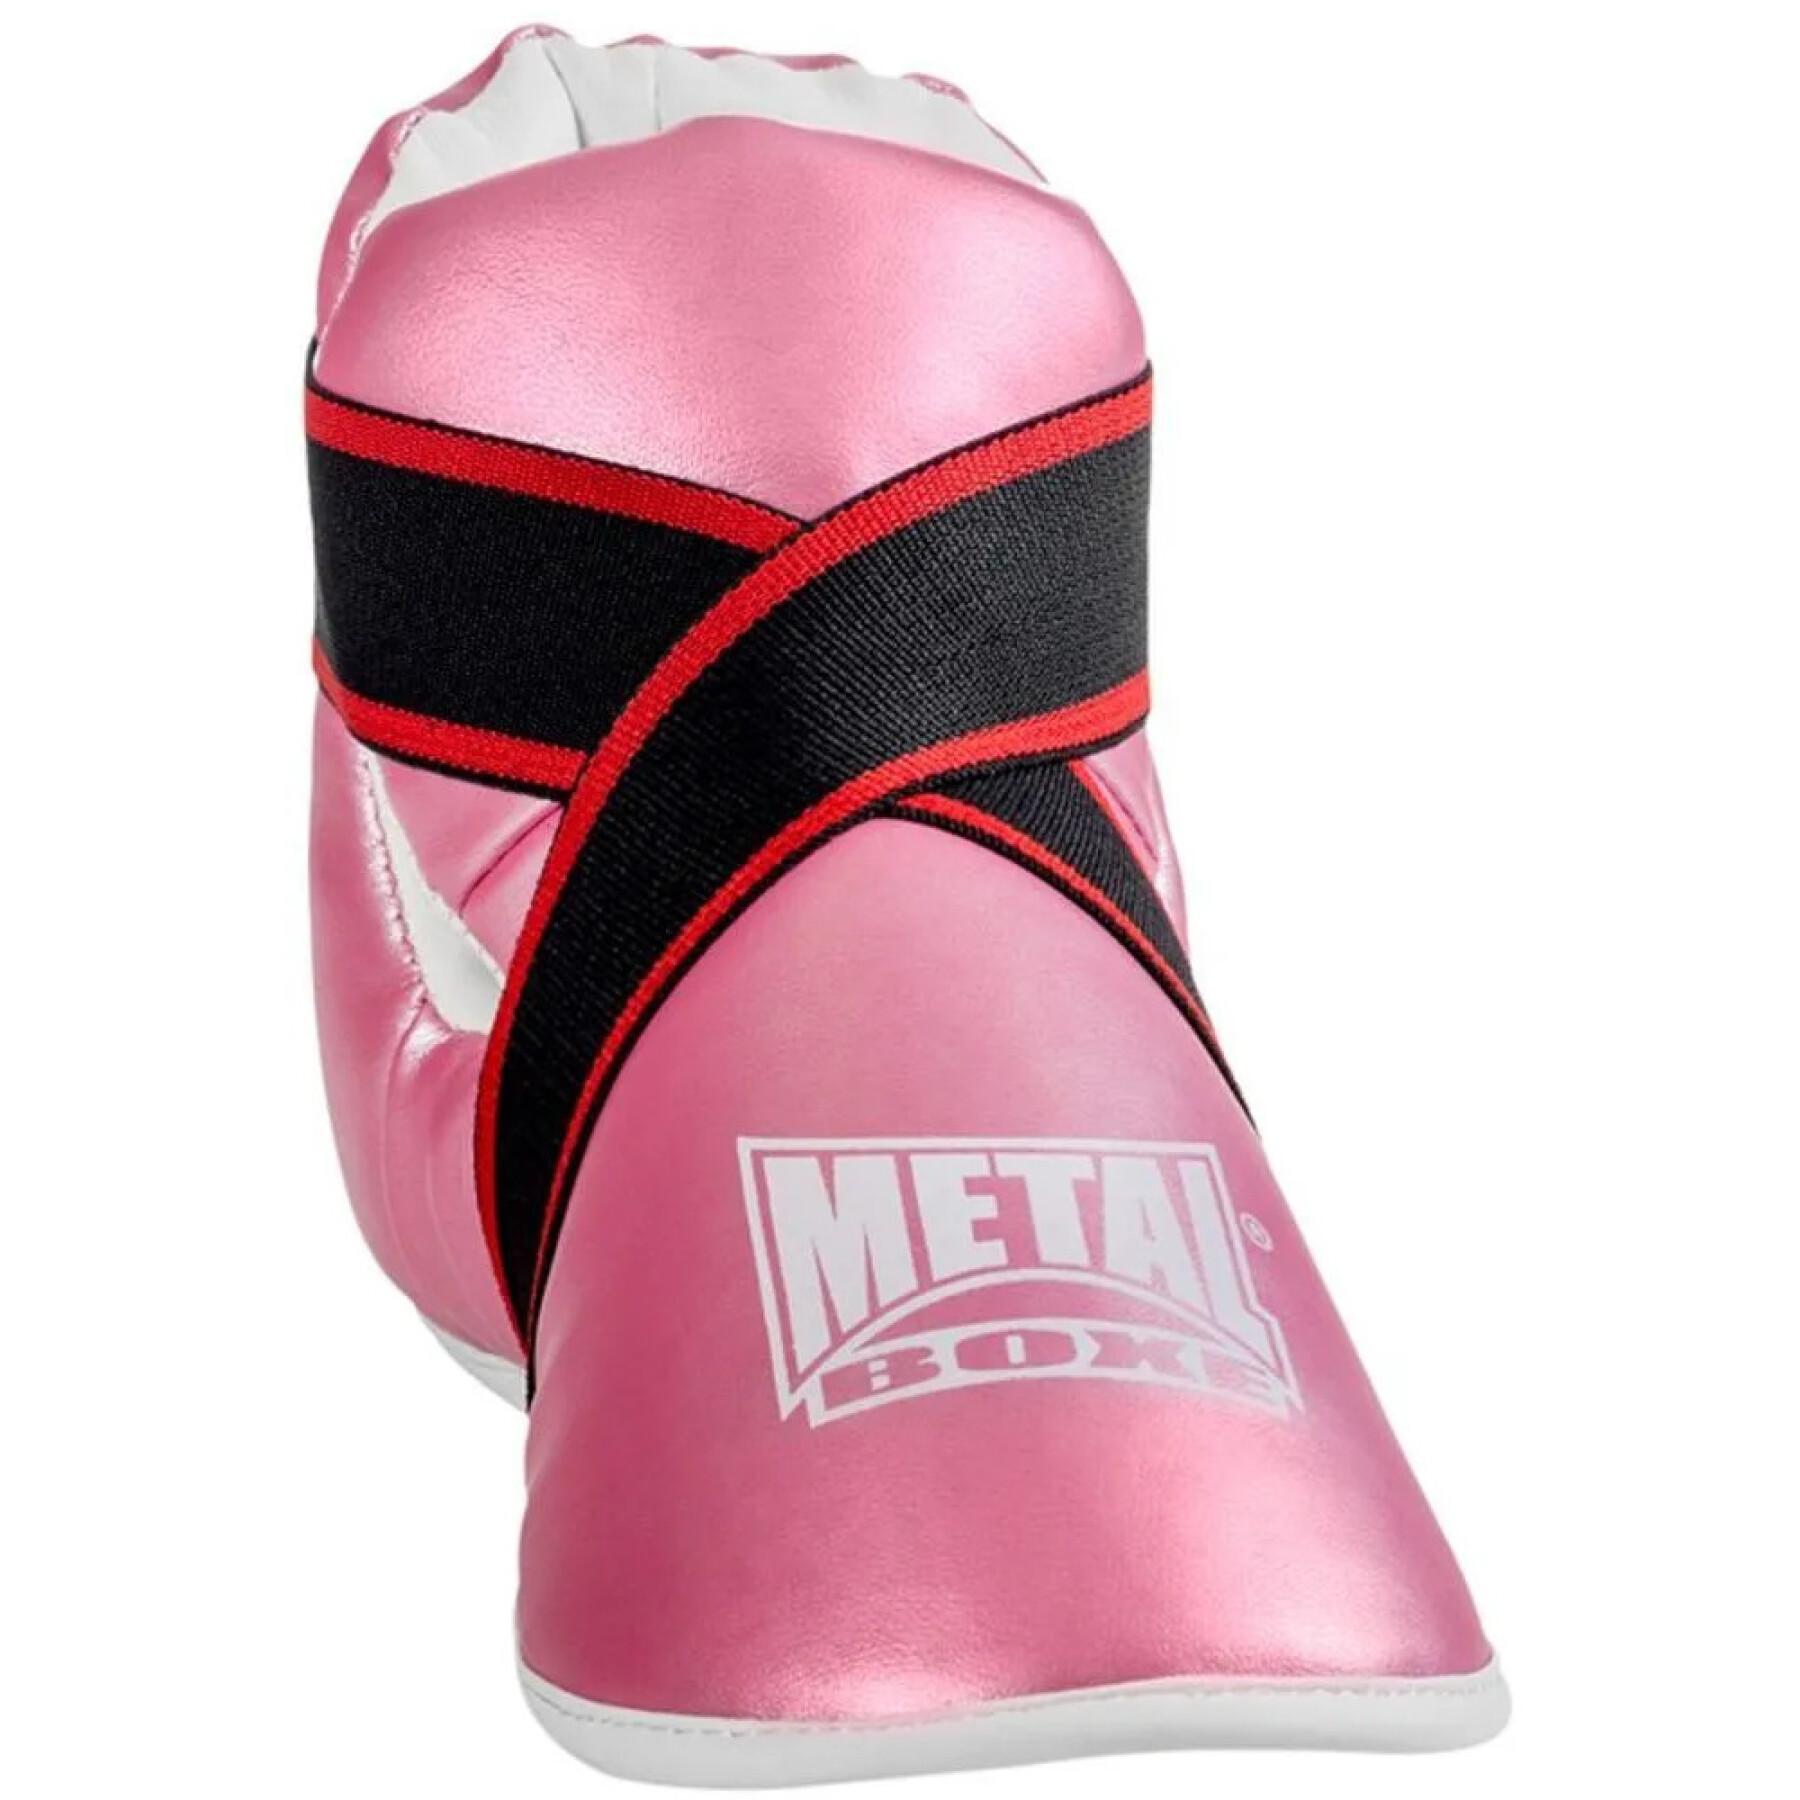 Foot protection for women Metal Boxe prima